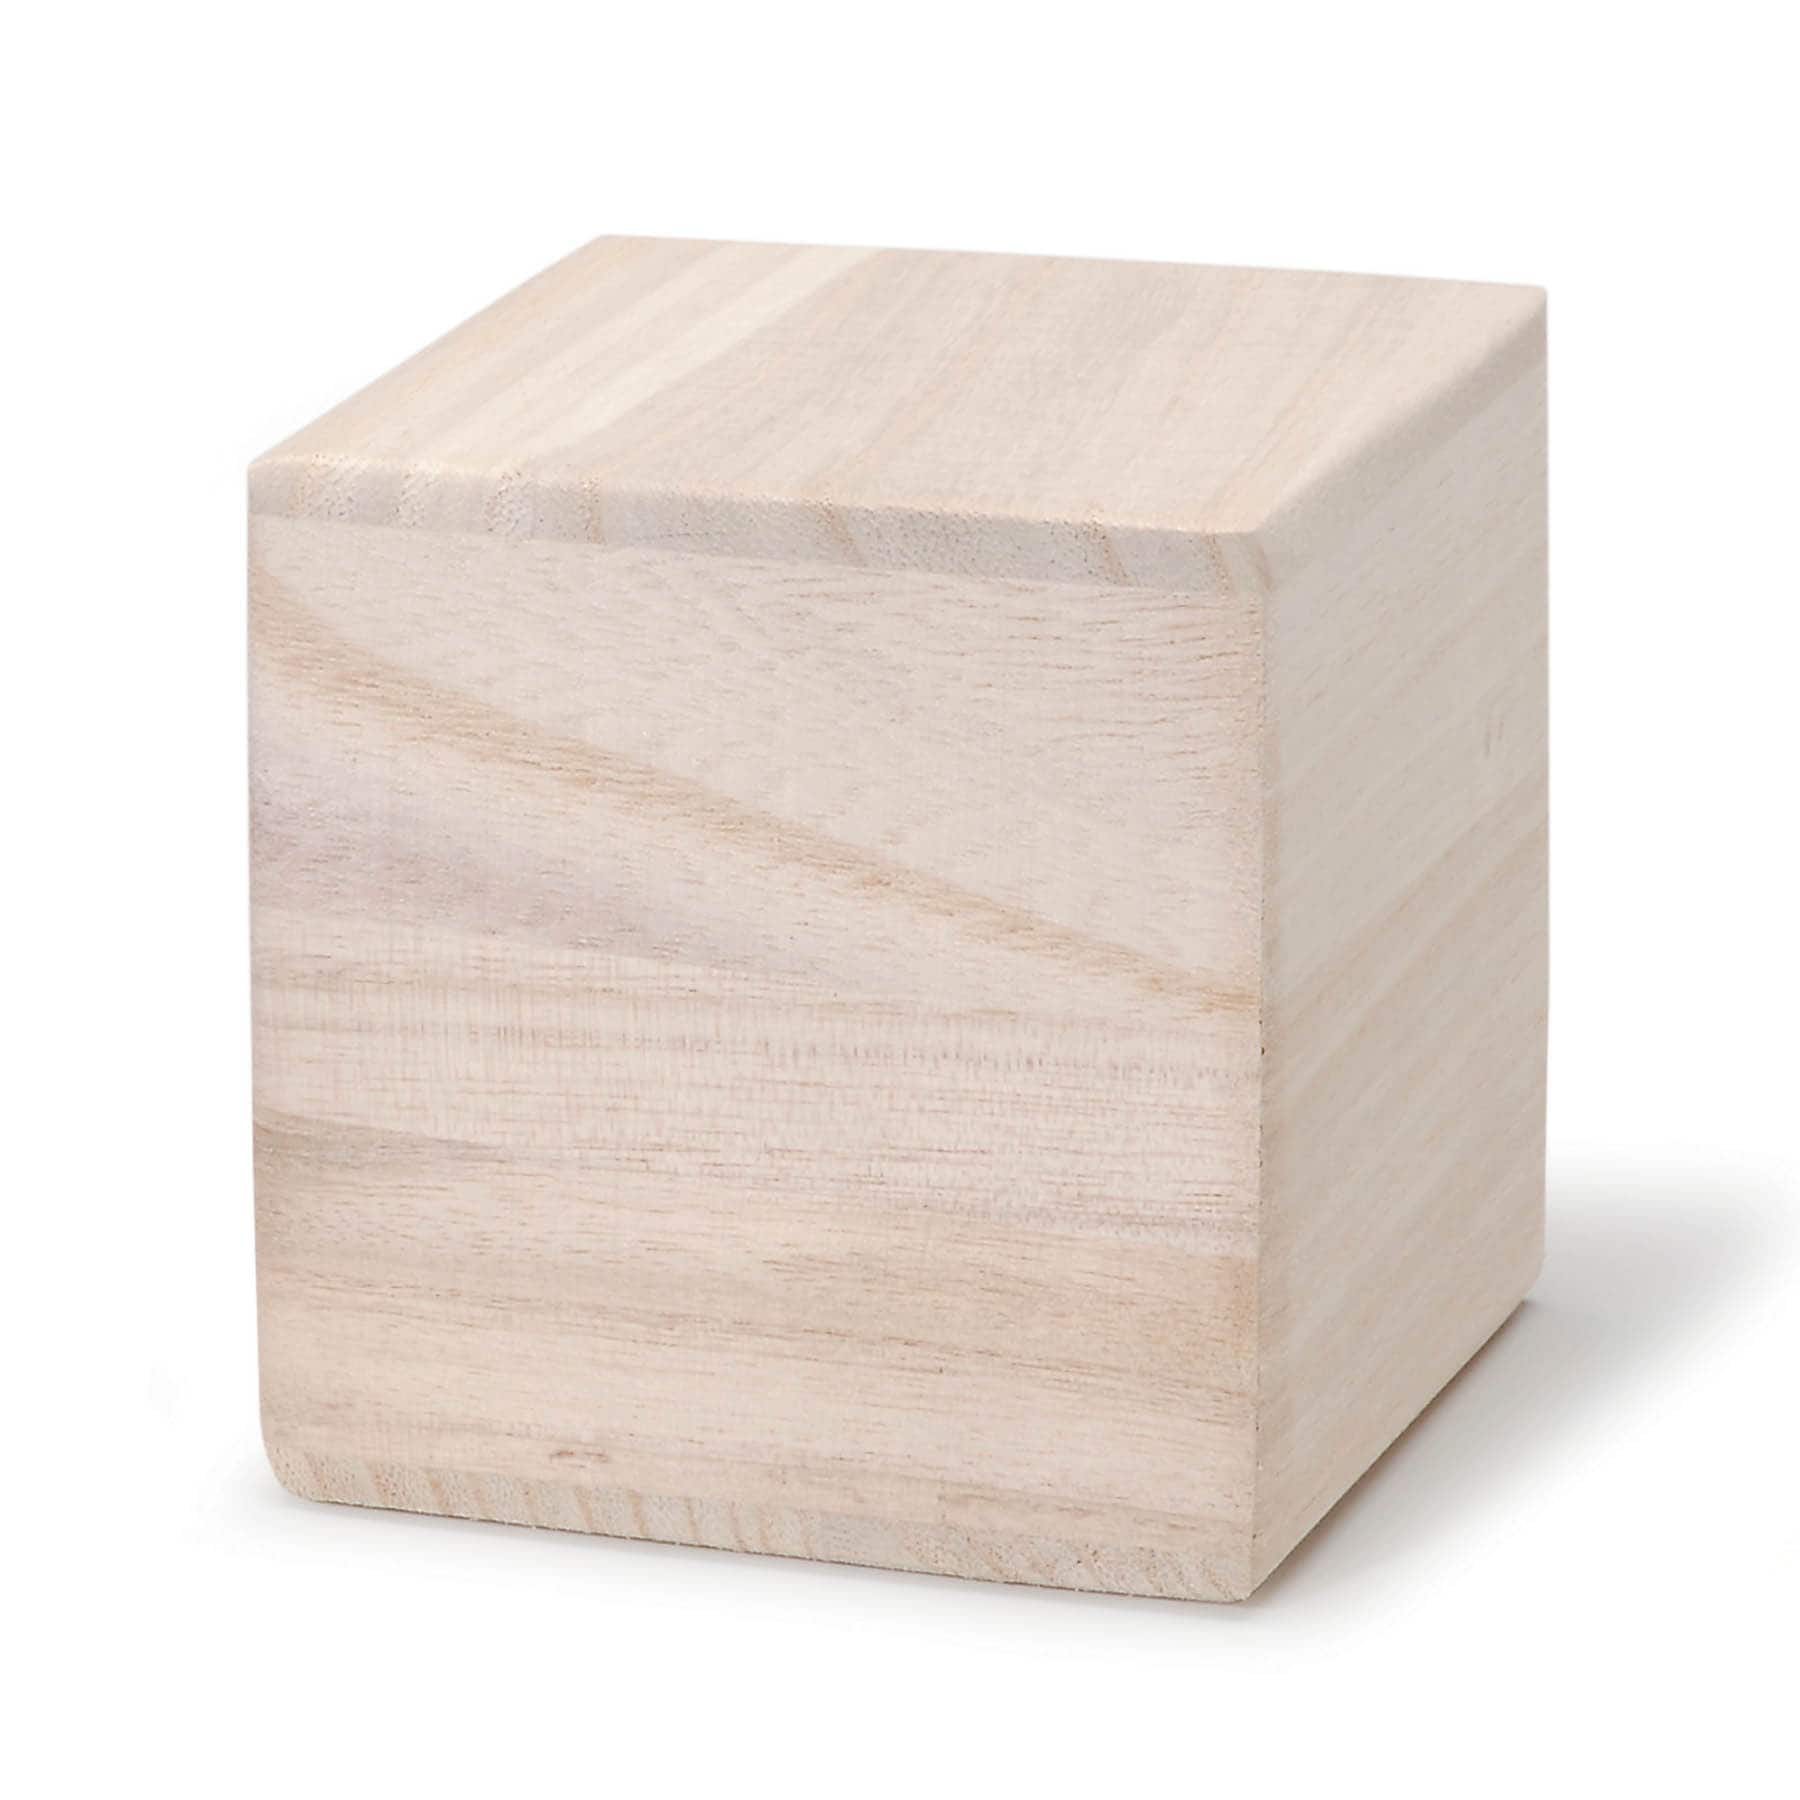 Darice® Unfinished Wooden Cube Block 